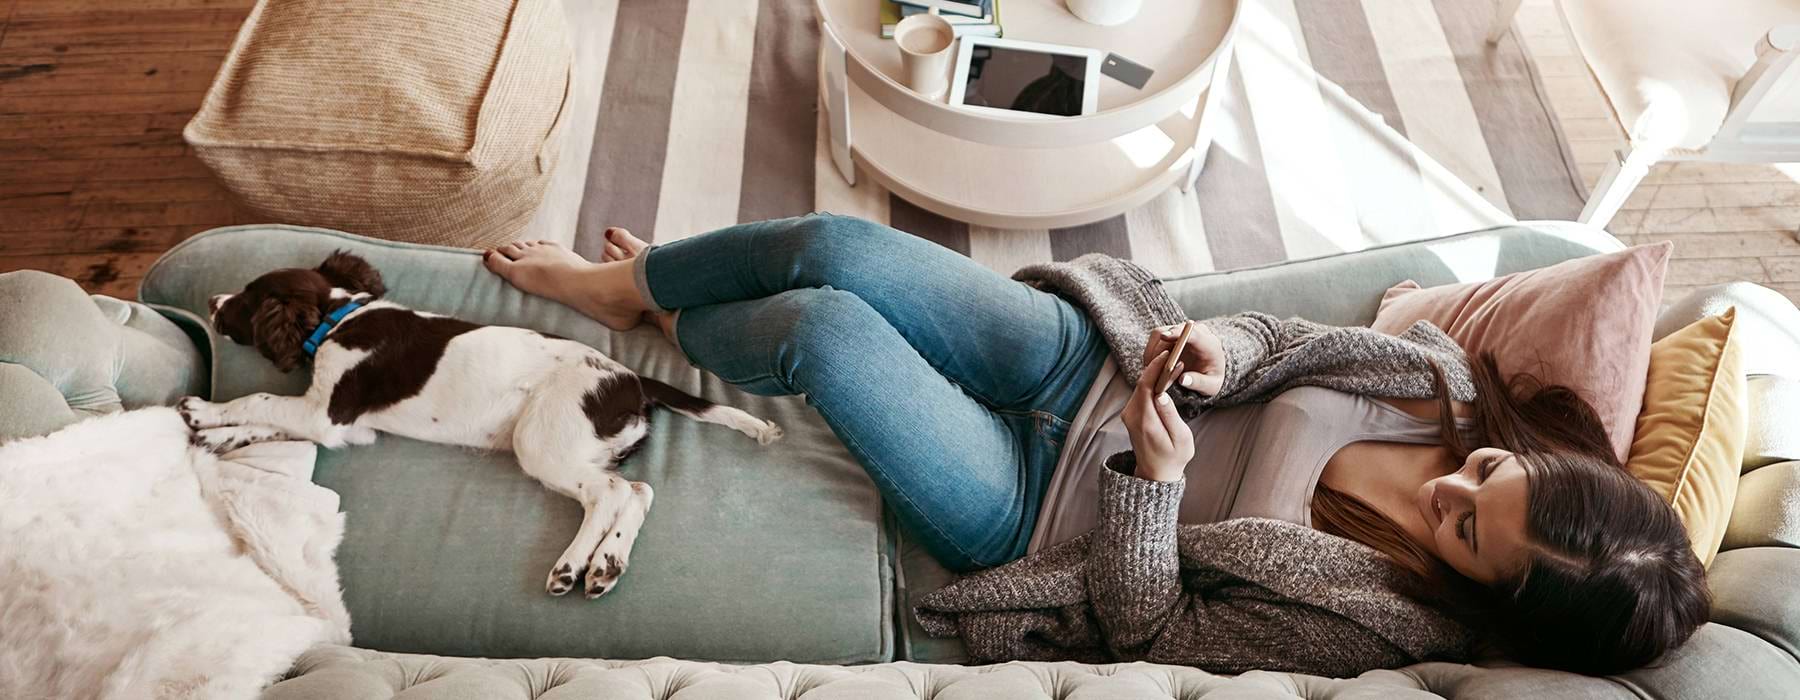 woman on couch with dog